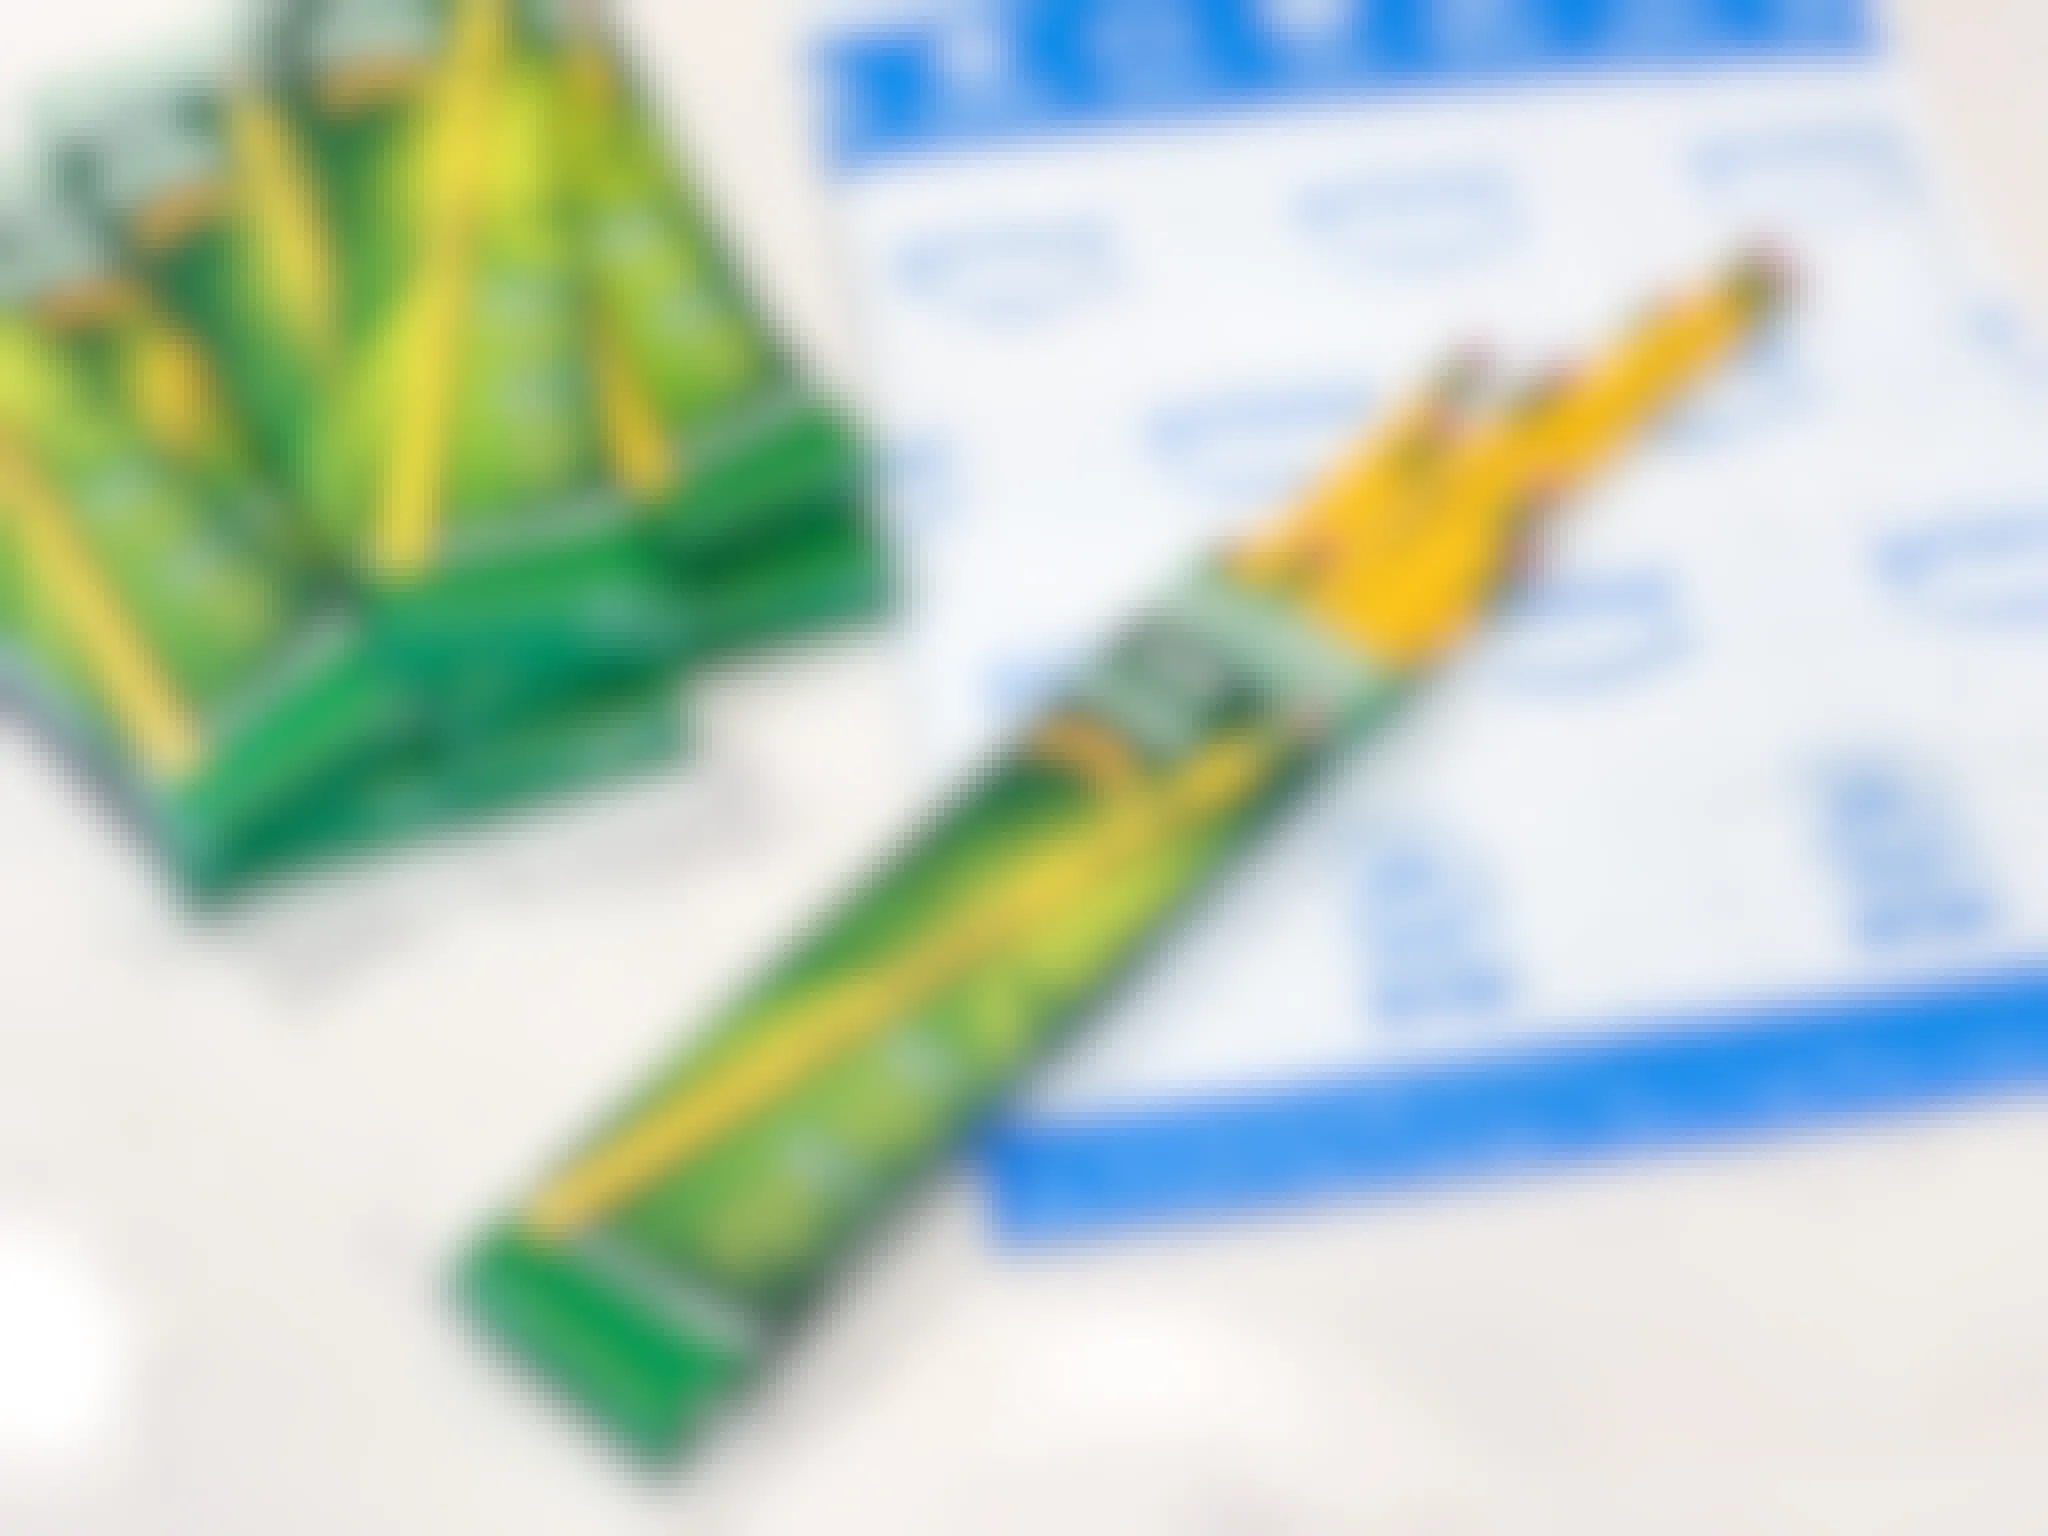 Ticonderoga pencils spilling out of their box on top of an Amazon mailing envelope on a table next to more boxes of Ticonderoga pencils.